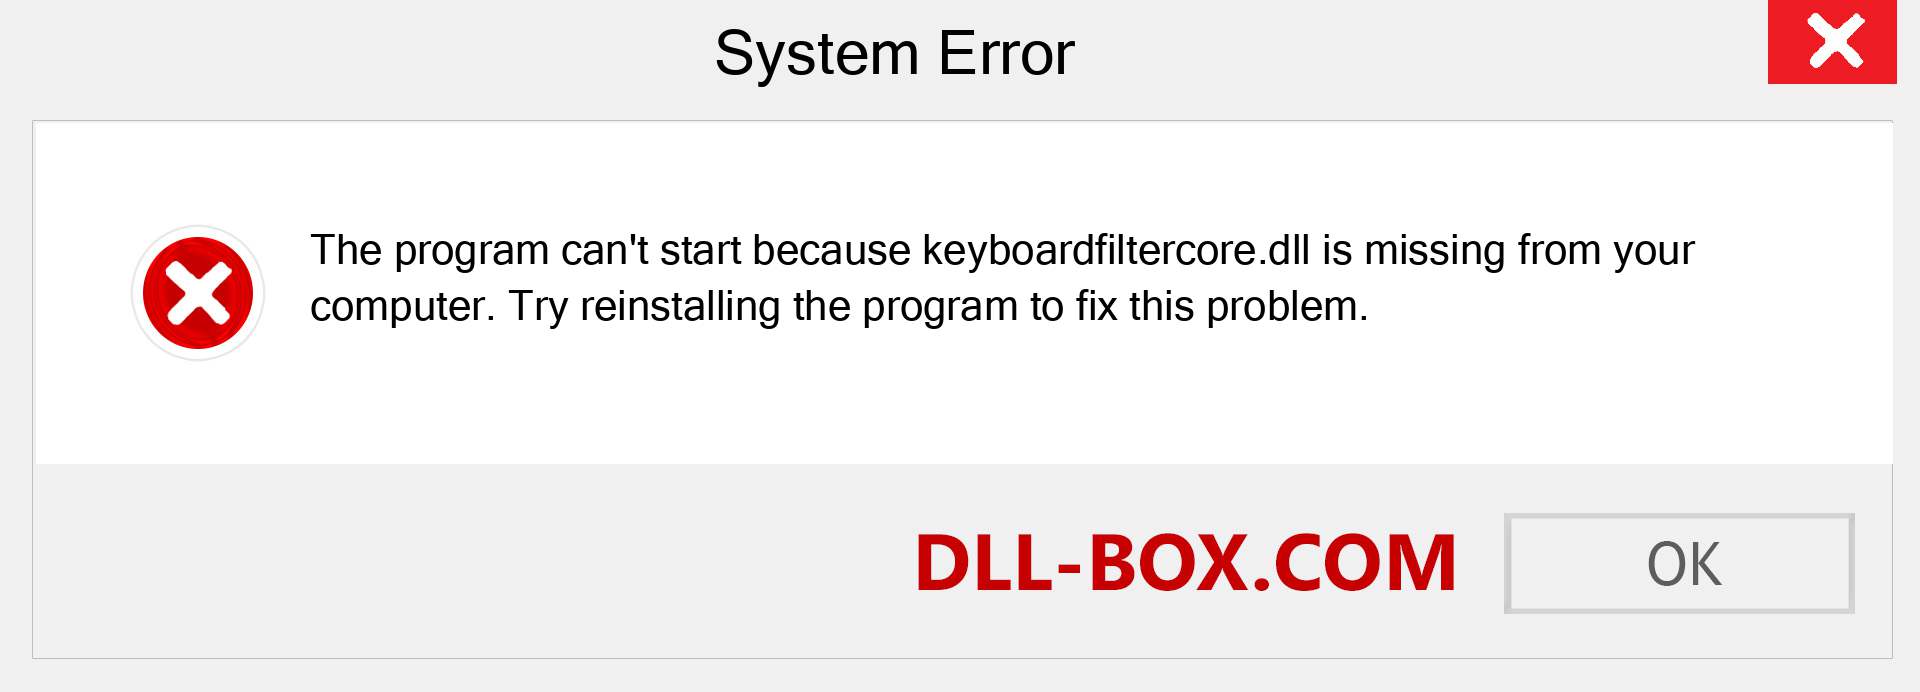  keyboardfiltercore.dll file is missing?. Download for Windows 7, 8, 10 - Fix  keyboardfiltercore dll Missing Error on Windows, photos, images